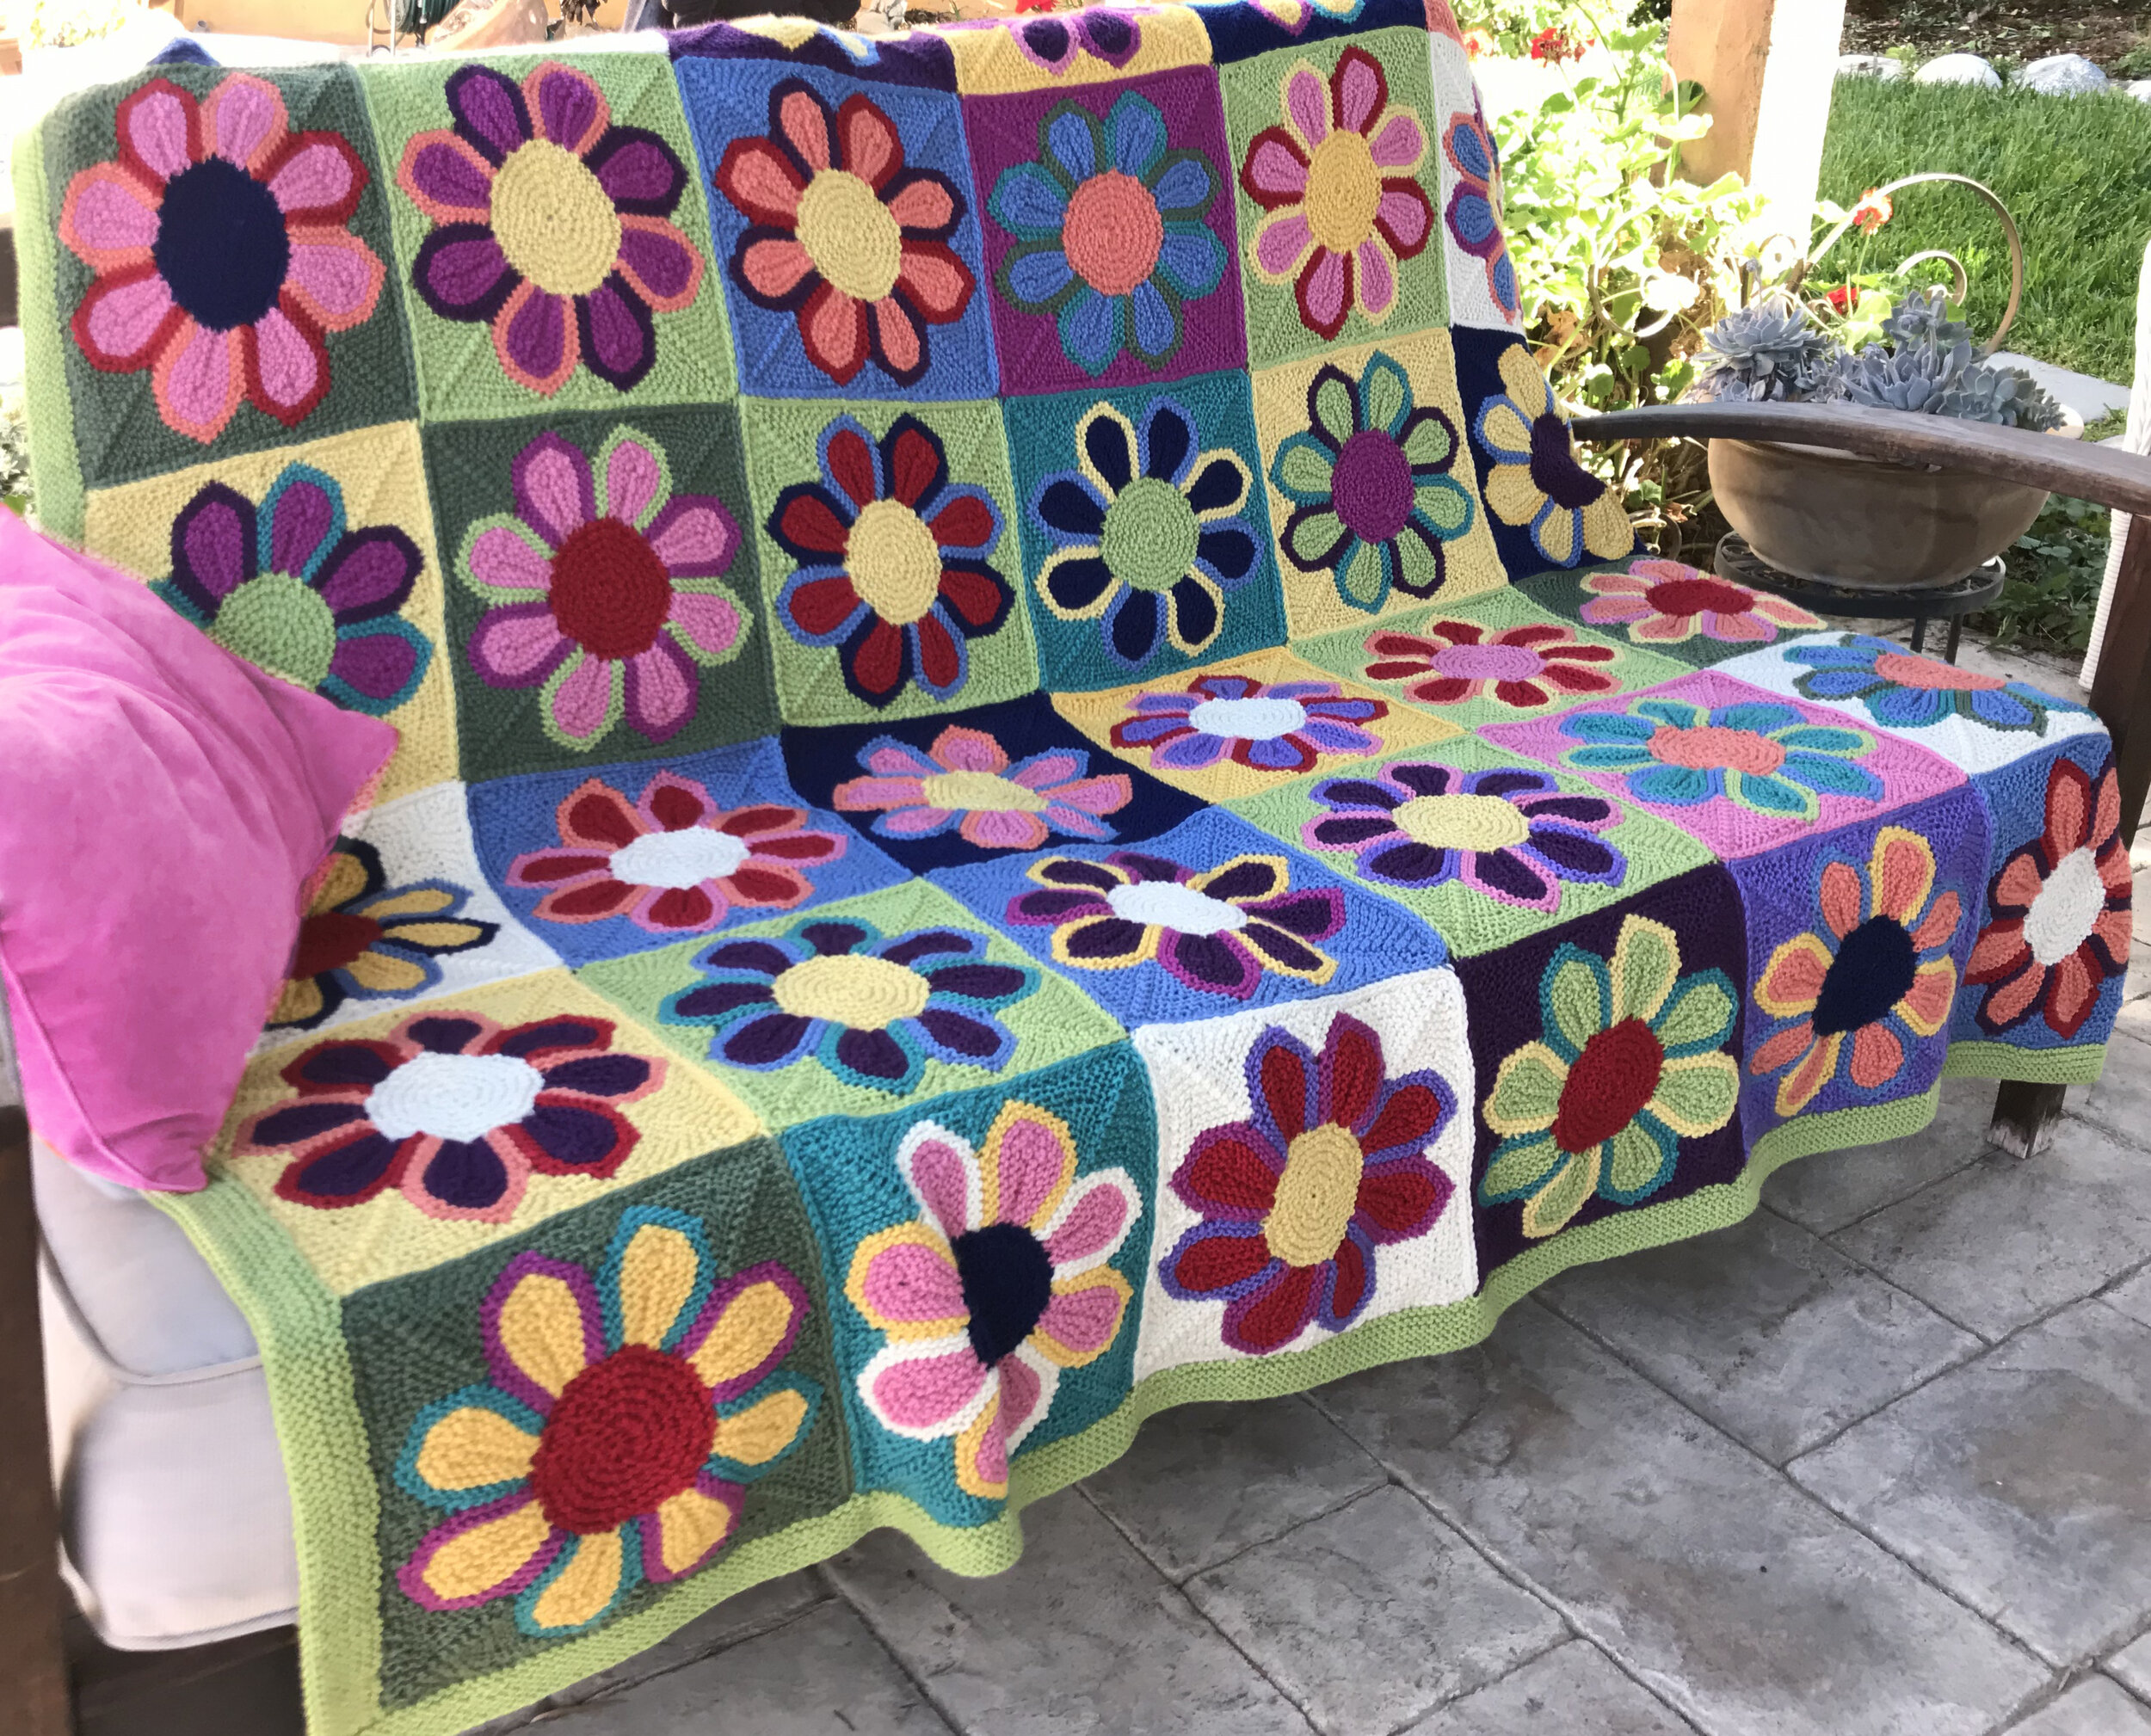 Flower Show blanket — The Knitwit